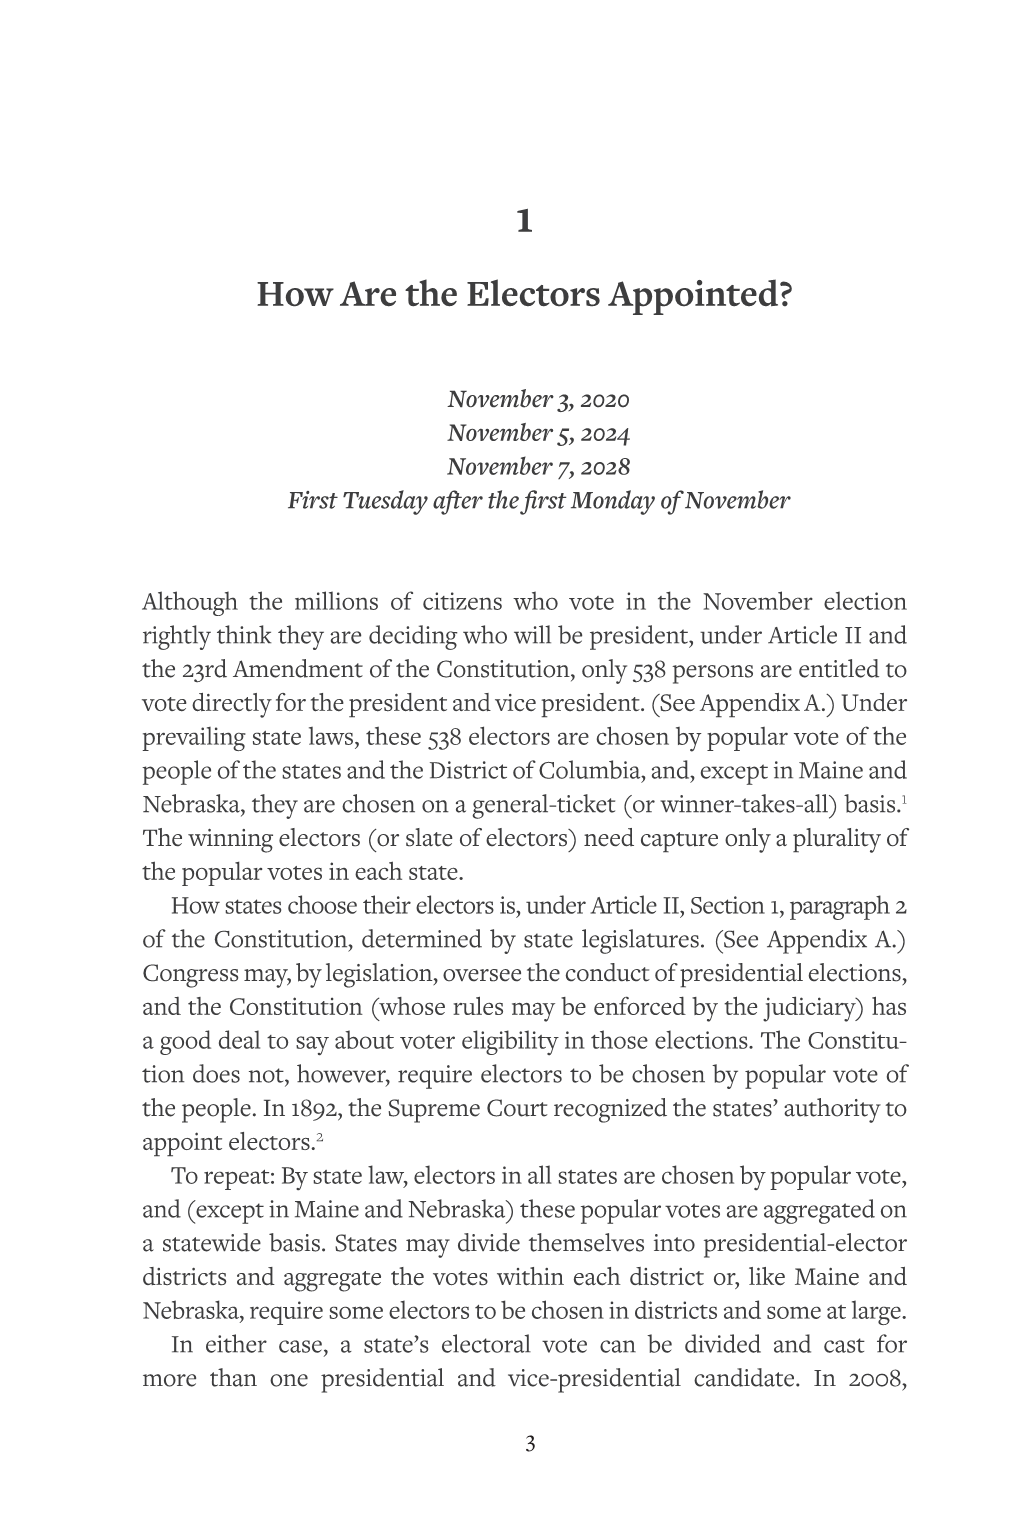 How Are the Electors Appointed?